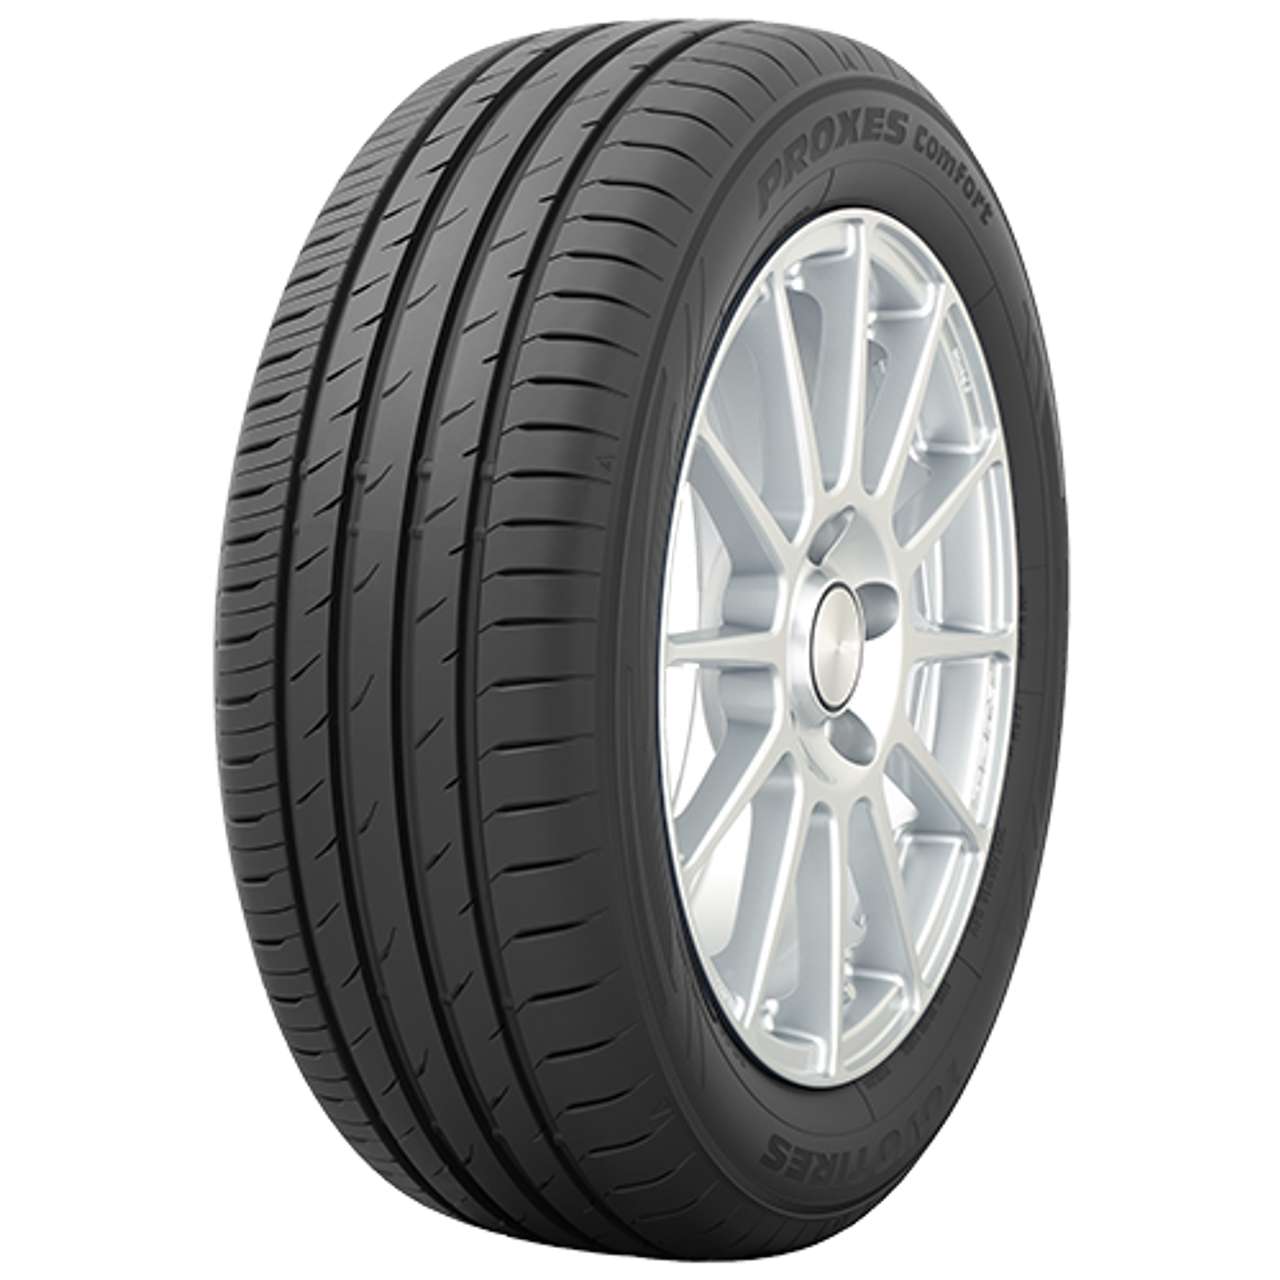 TOYO PROXES COMFORT SUV 225/60R17 103V BSW XL